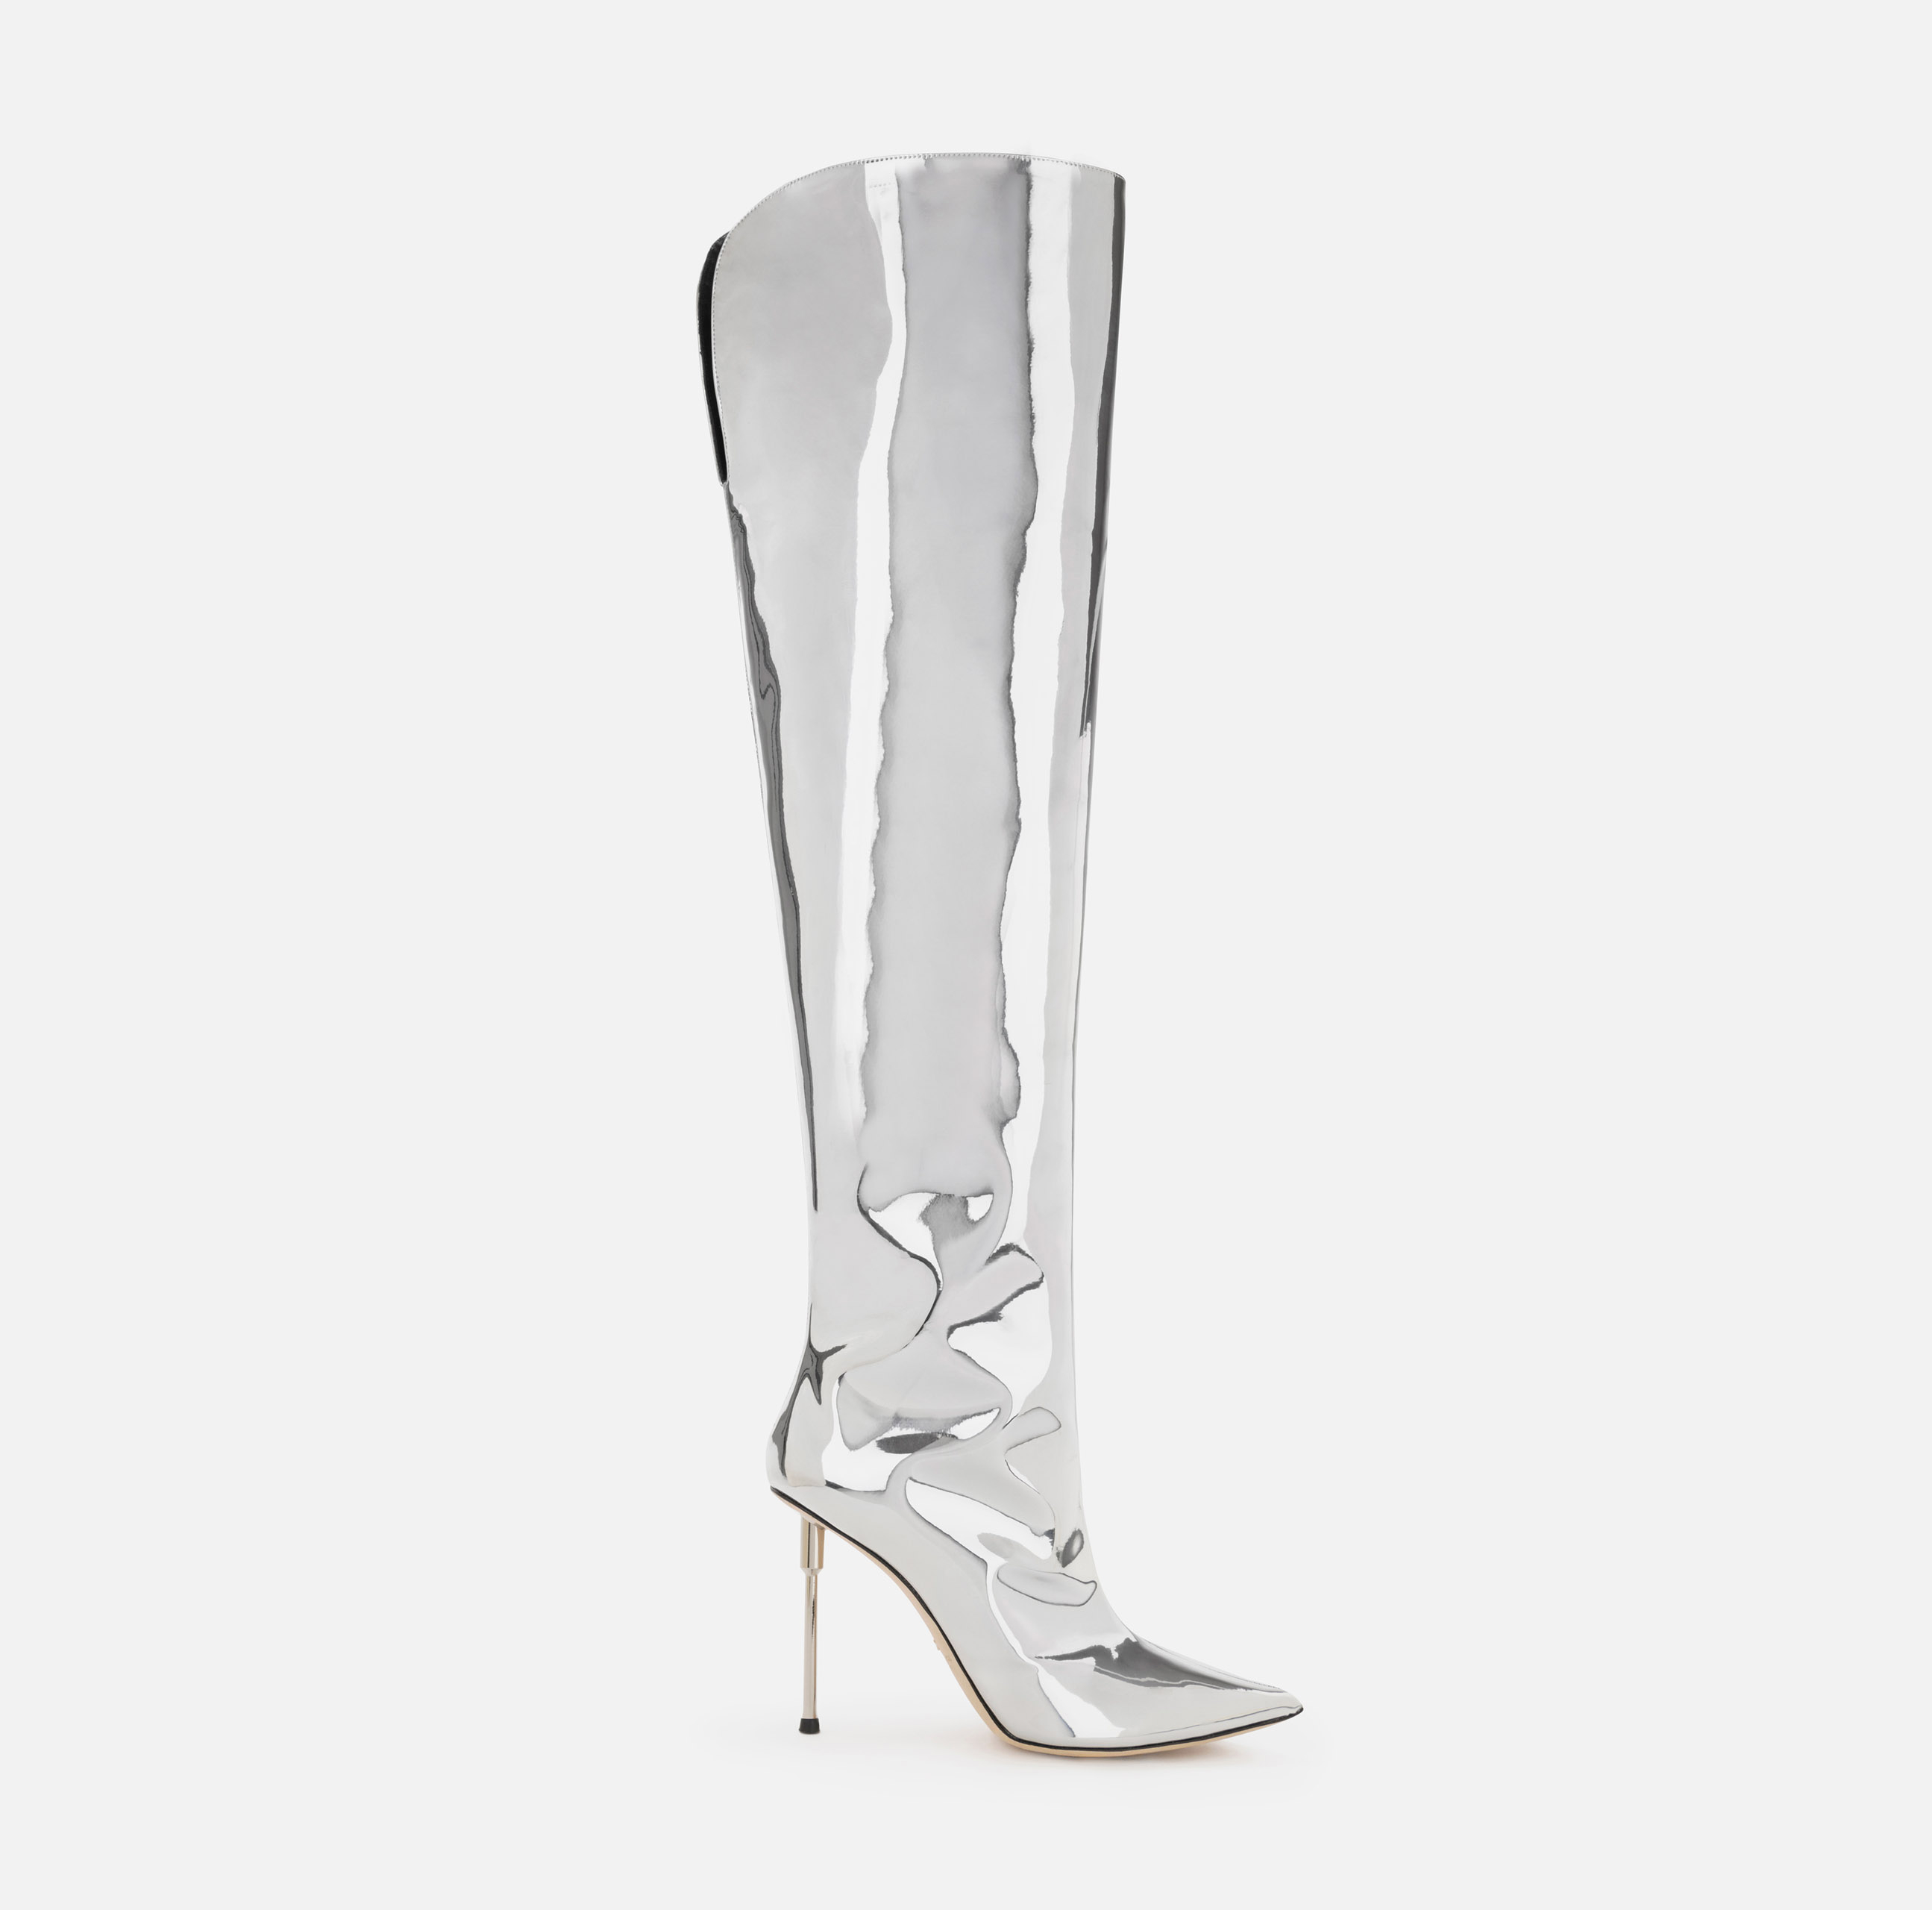 Over-the-knee boots in reflective fabric - SCARPE - Elisabetta Franchi